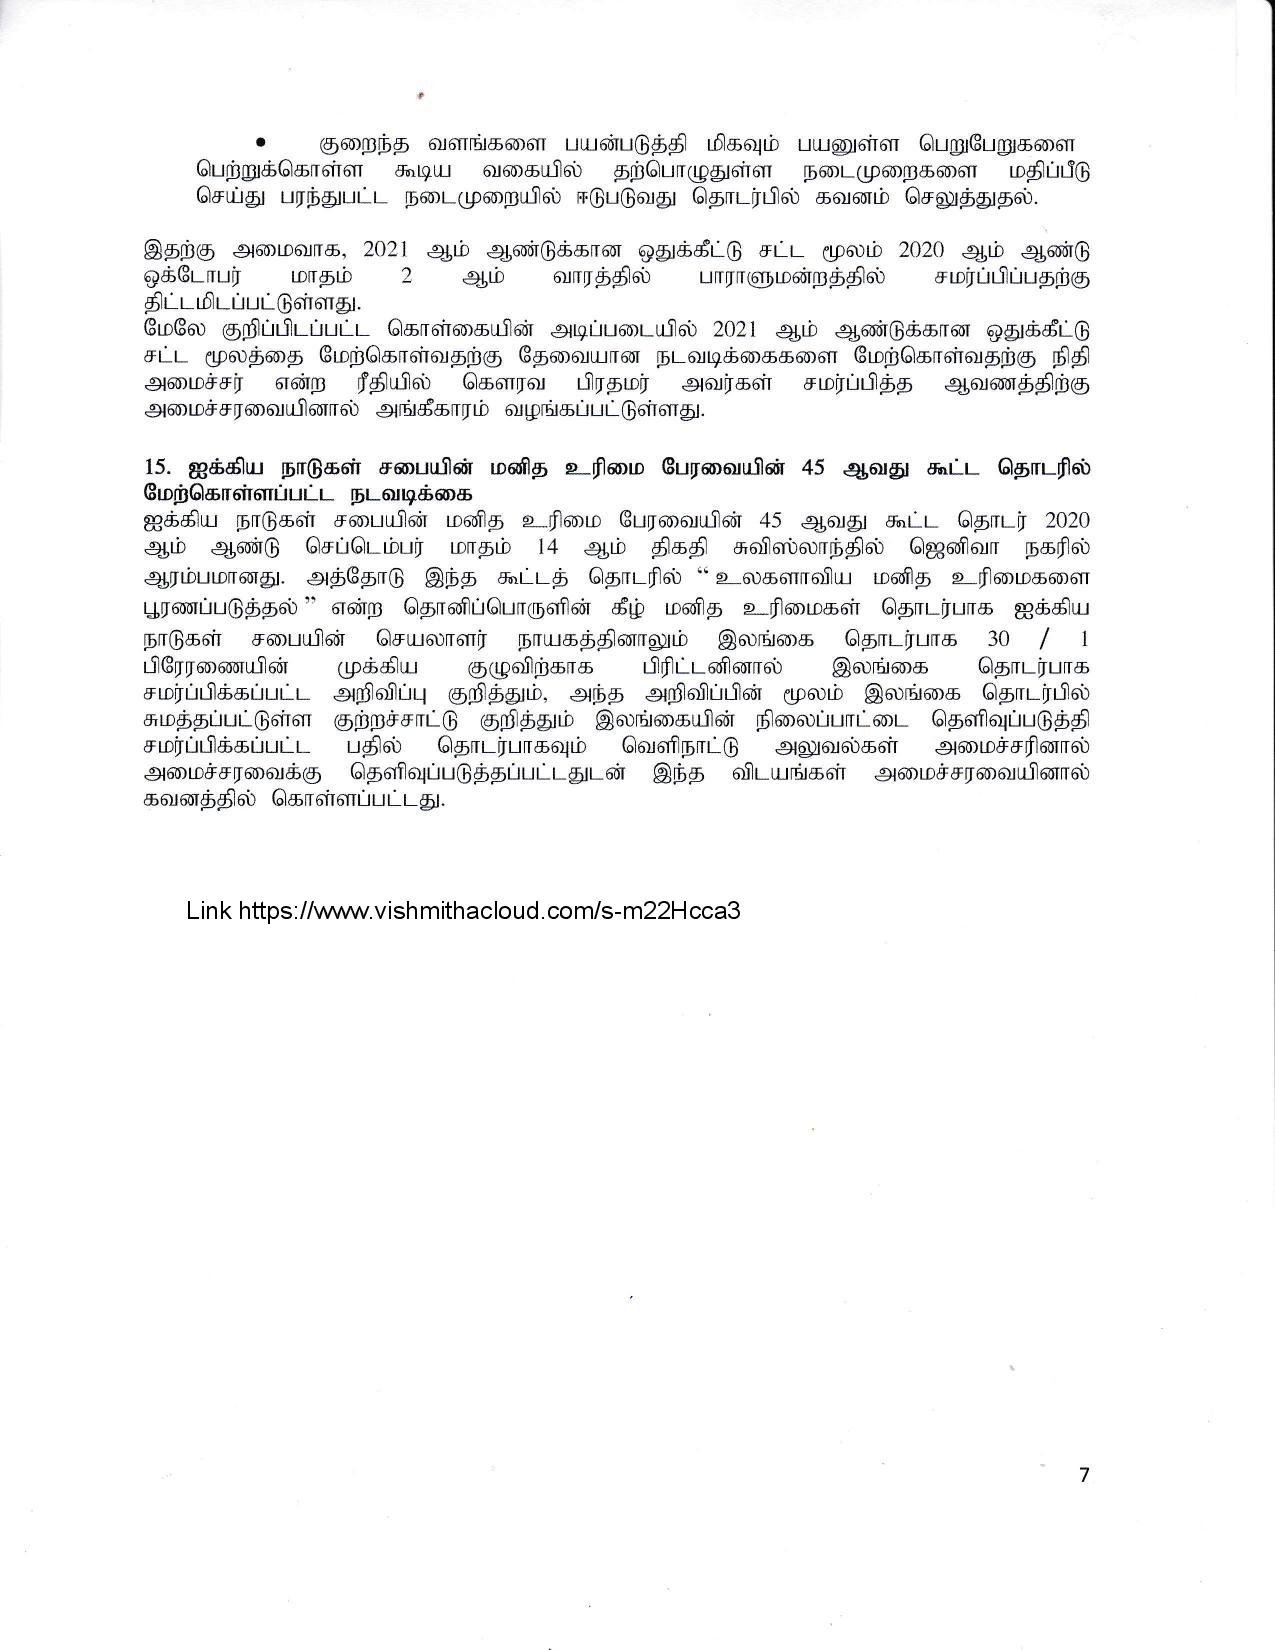 Cabinet Decision on 16.09.2020 0 Tamil 1 page 007